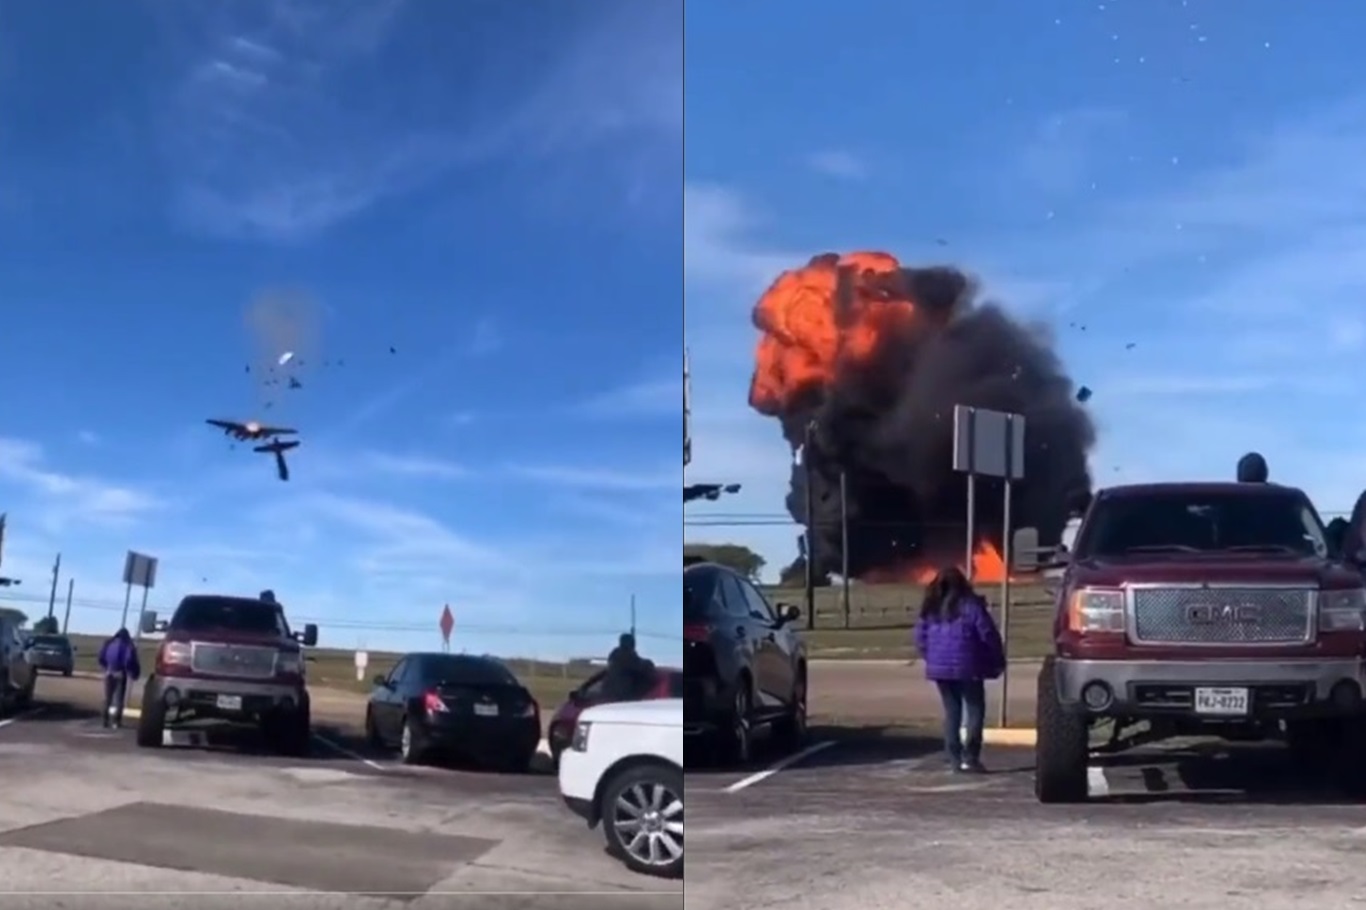 Two planes collide during airshow in United States